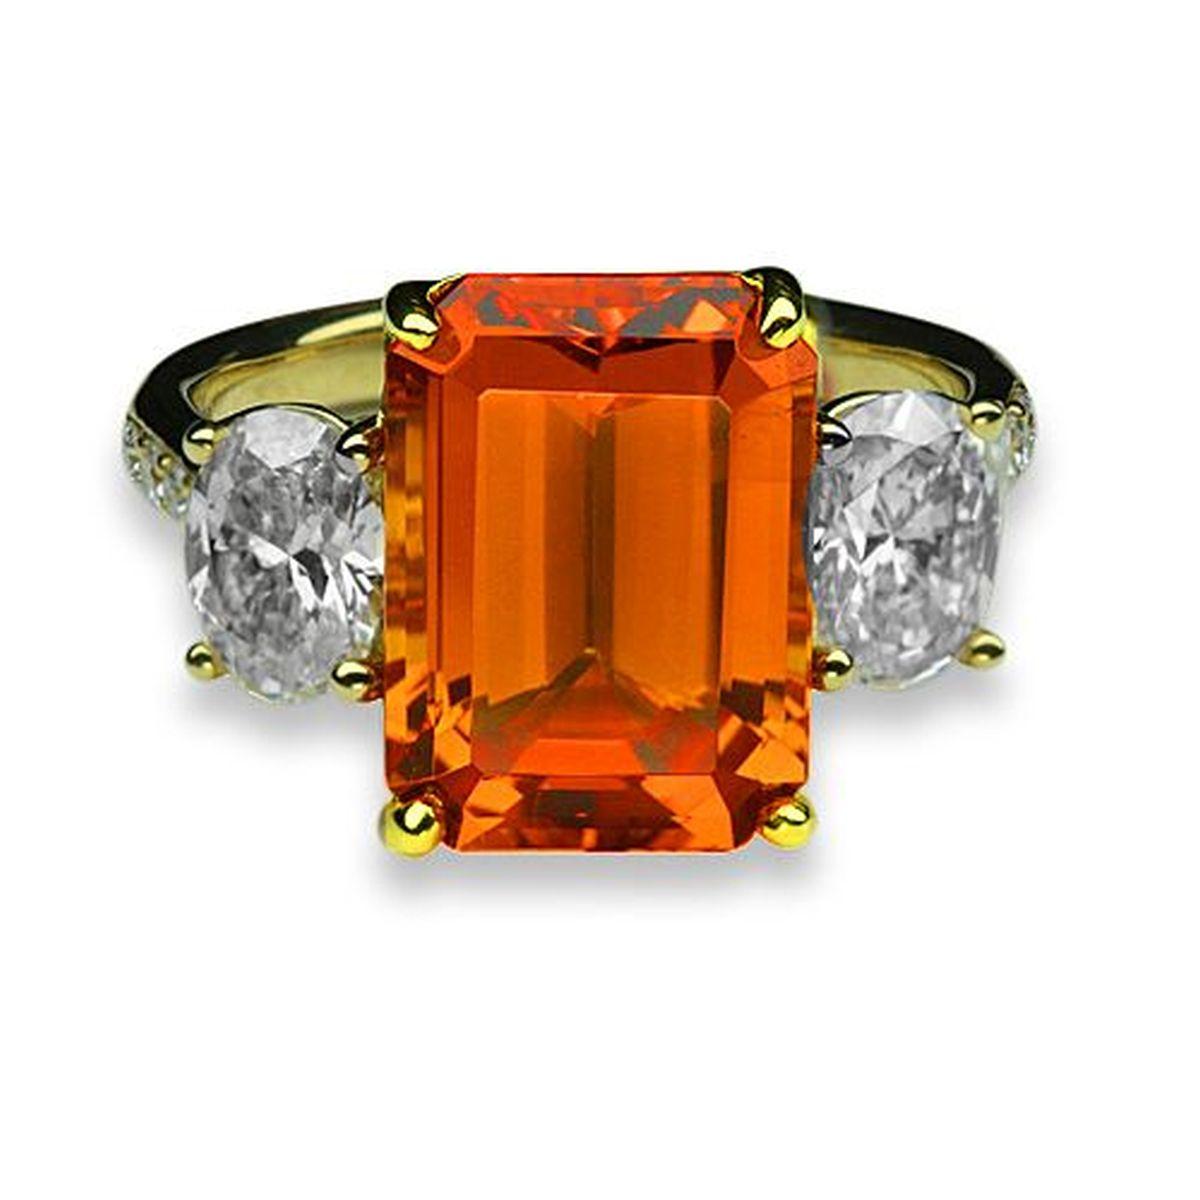 Simply Beautiful! Finely detailed Art Deco Revival 3-Stone Gold Ring. Centering a securely nestled Hand set Emerald-Cut Vivid Orange Mandarin Garnet, VS, weighing approx. 6.64 Carats with a Diamond D-VS on either side; approx. 1.18tcw. The ring is